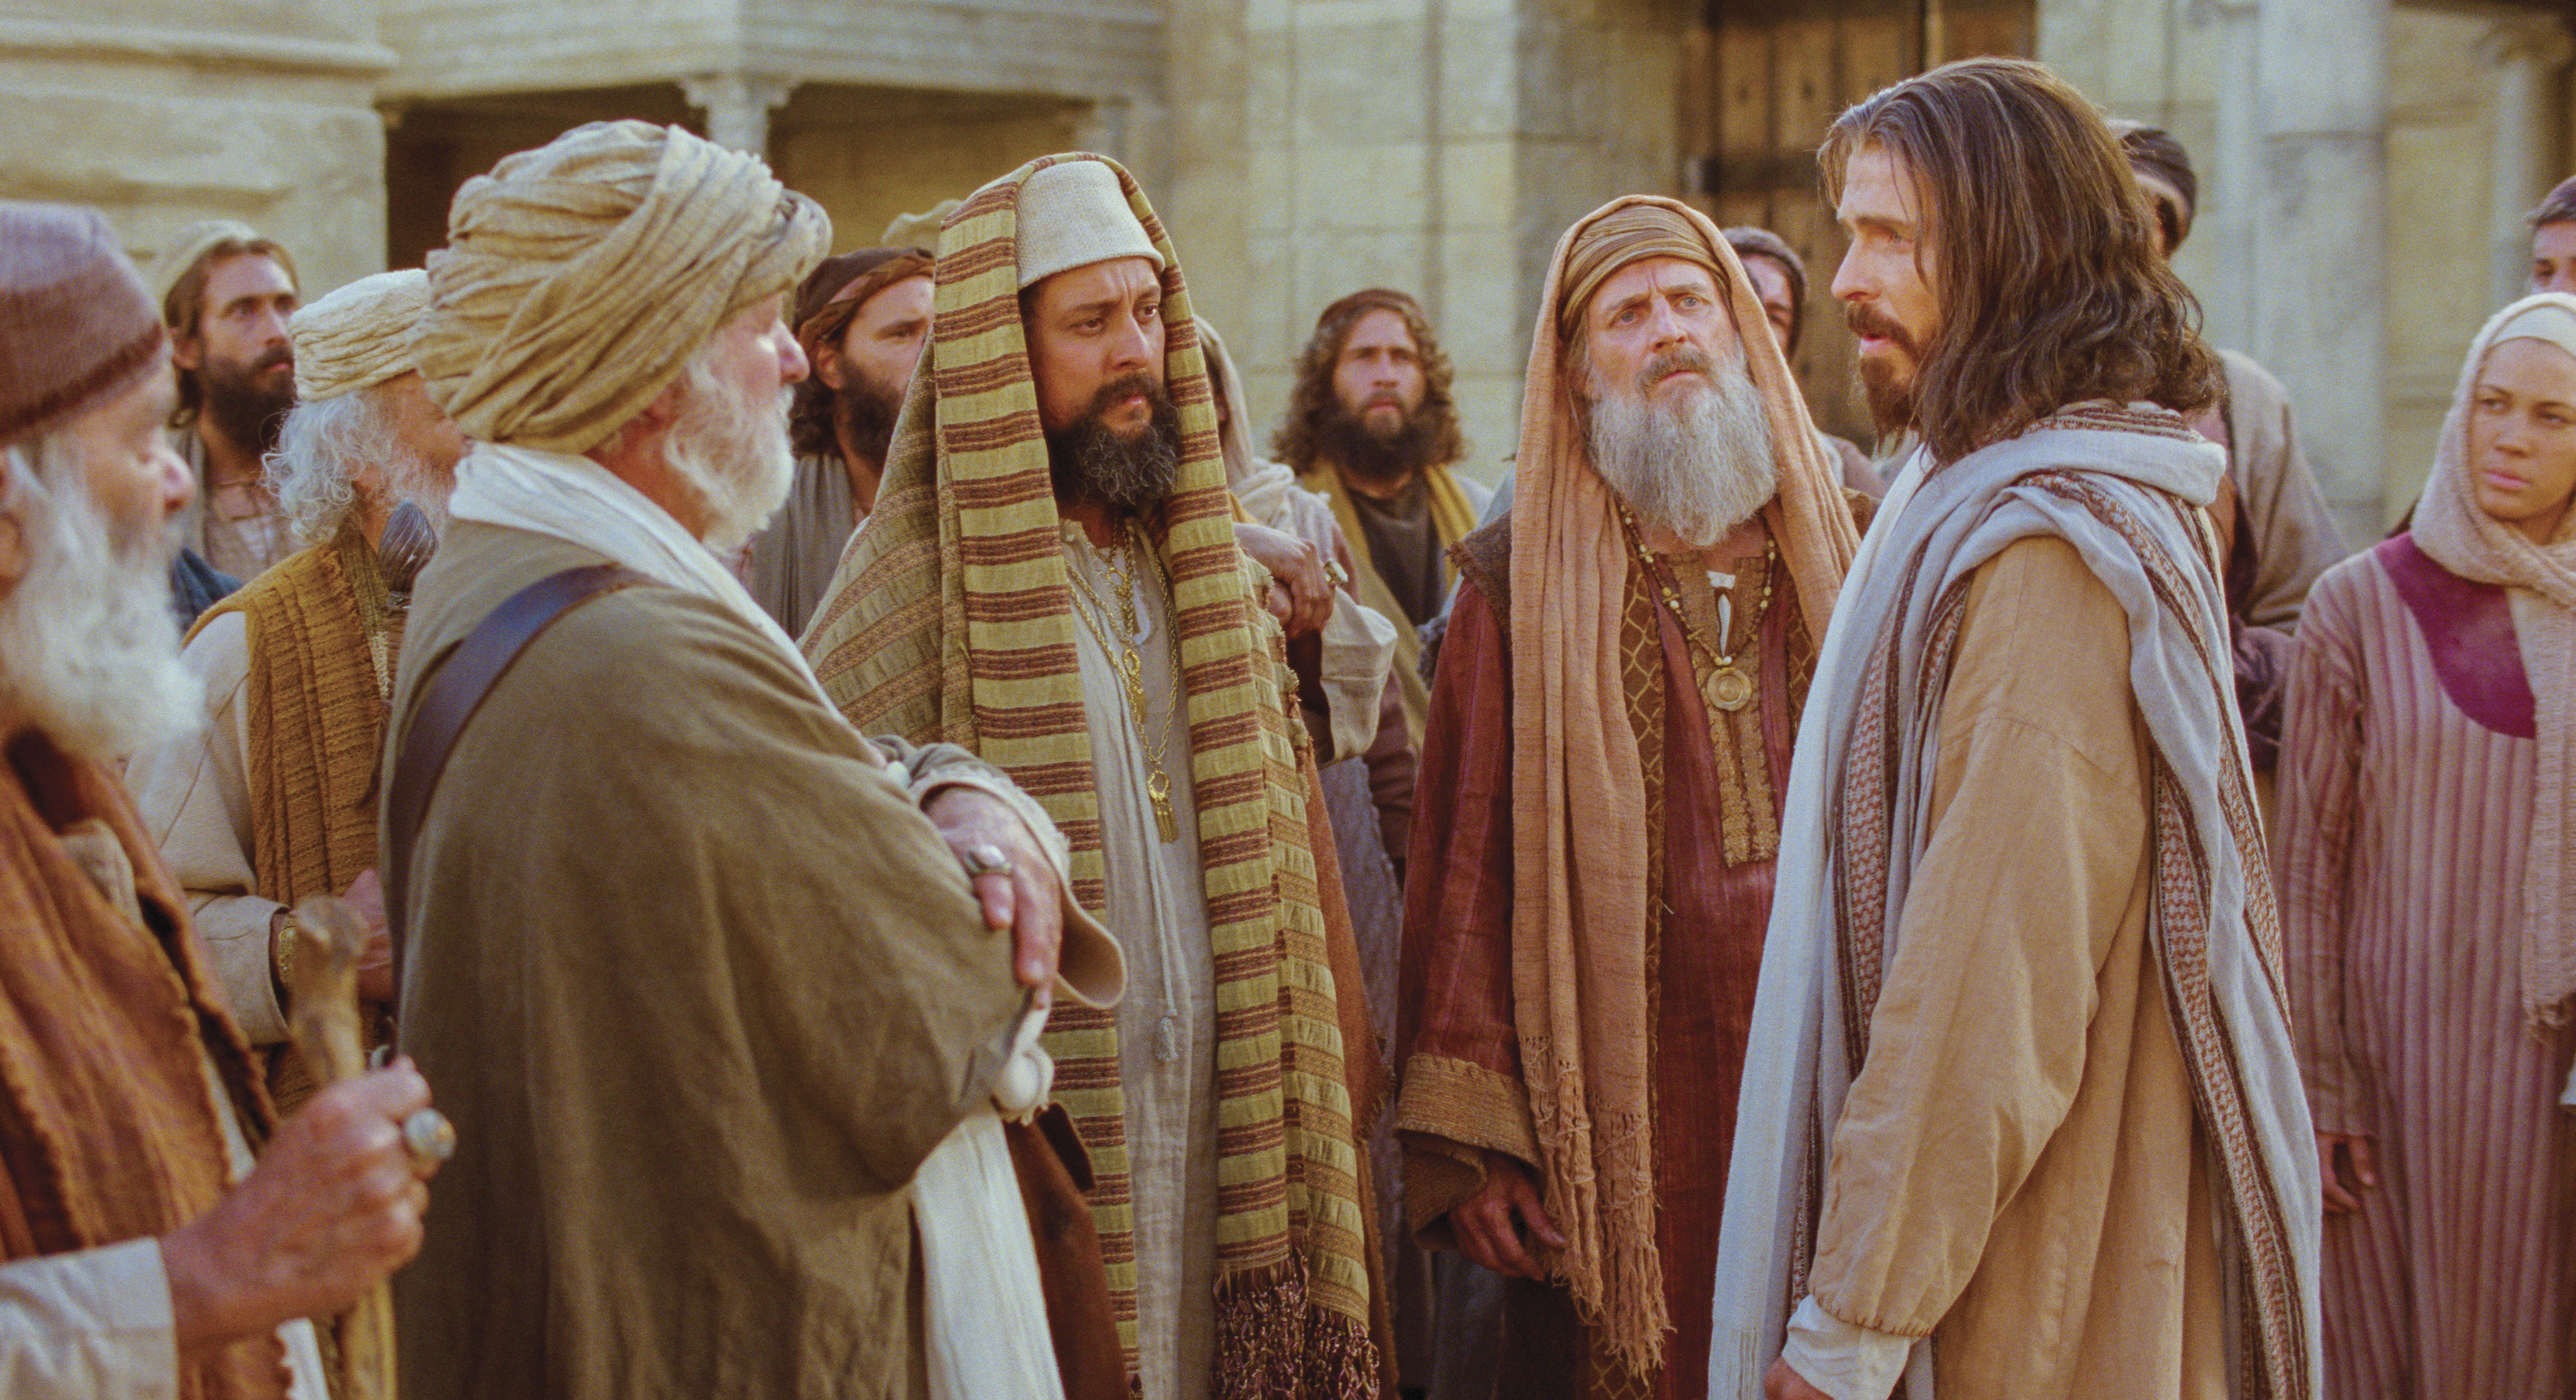 The Pharisees confront Jesus.